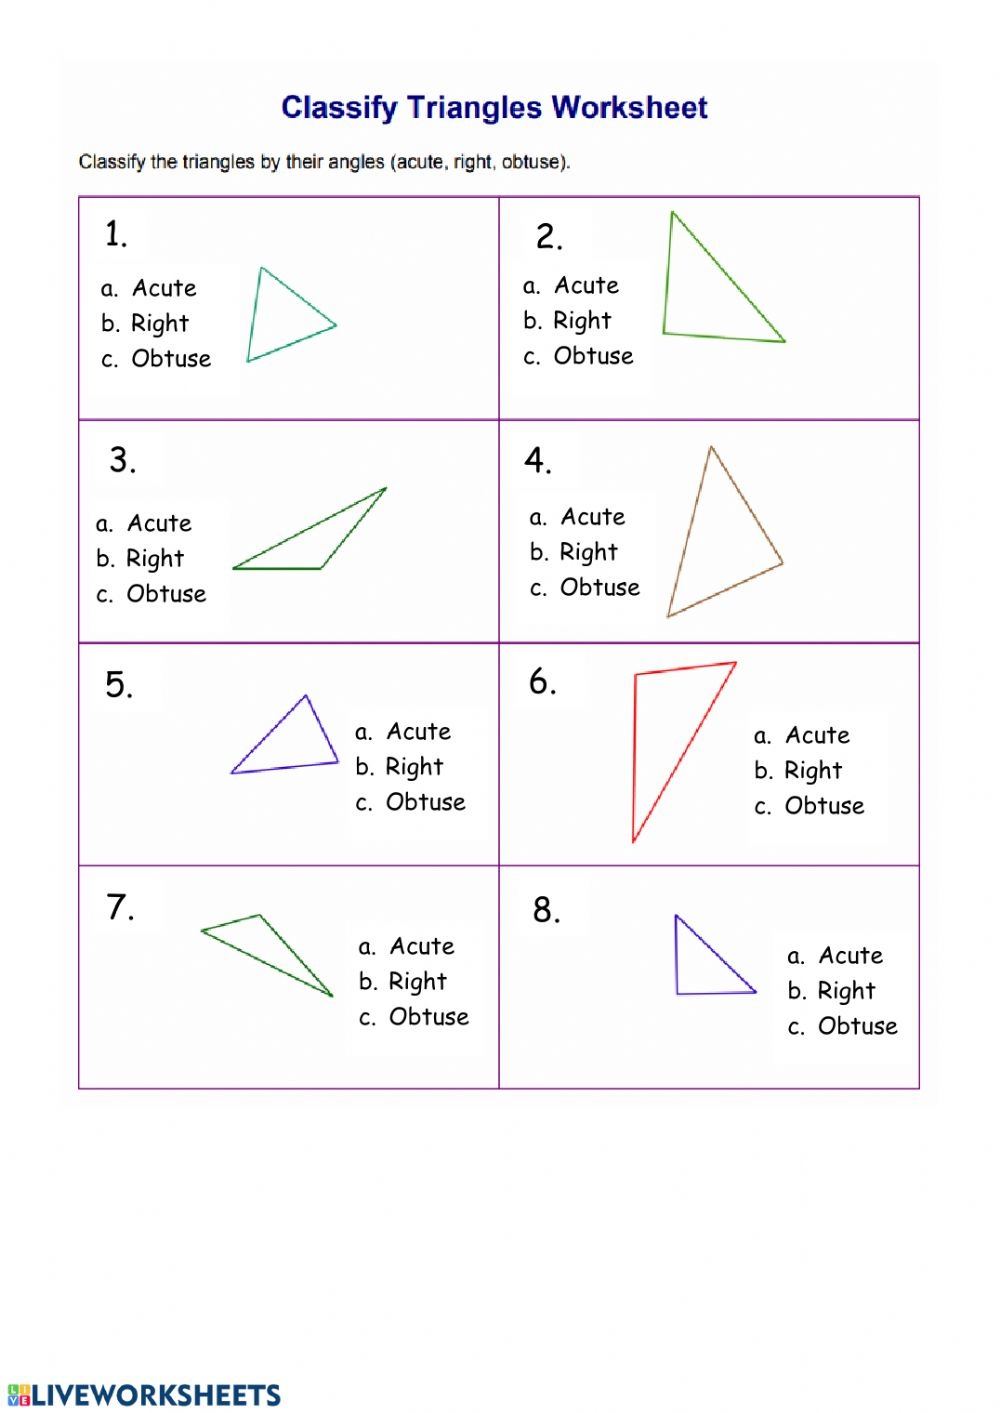 Classify Triangles Worksheet 7111